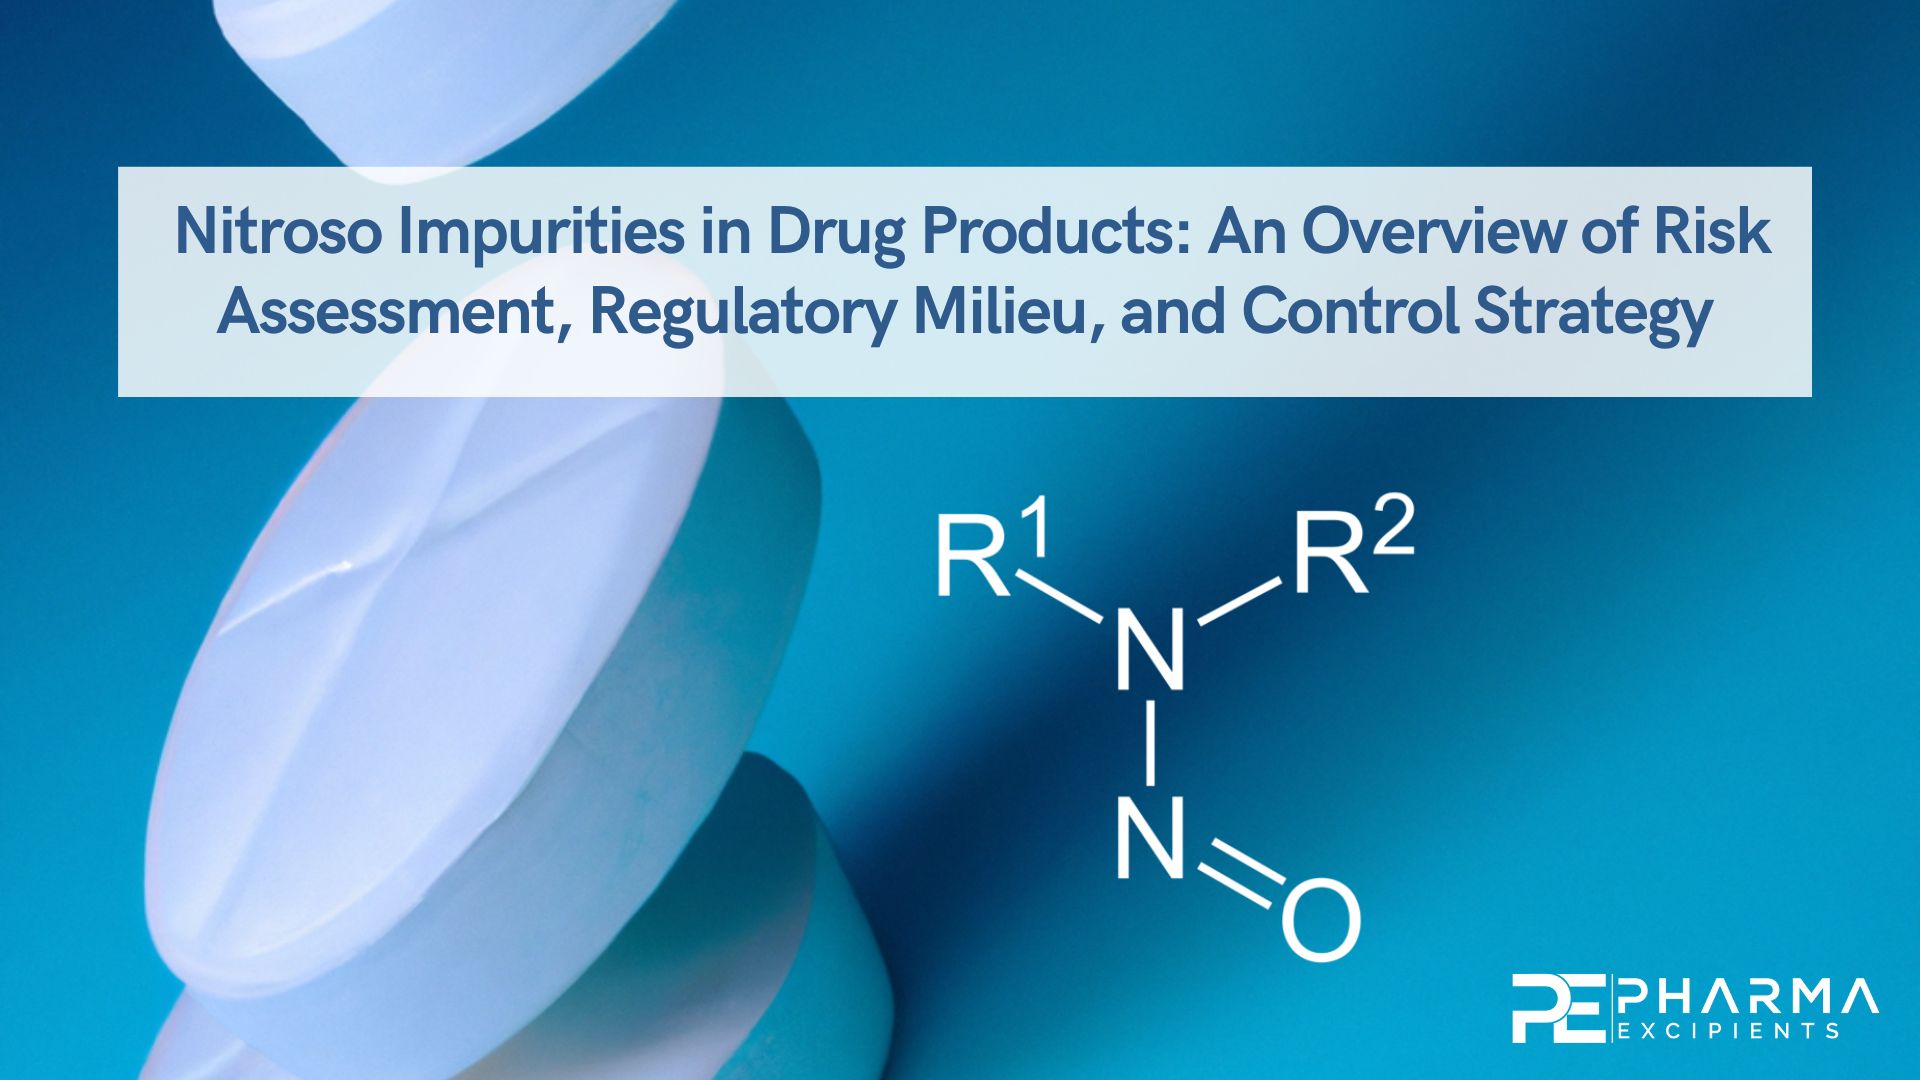 Nitroso Impurities in Drug Products: An Overview of Risk Assessment, Regulatory Milieu, and Control Strategy